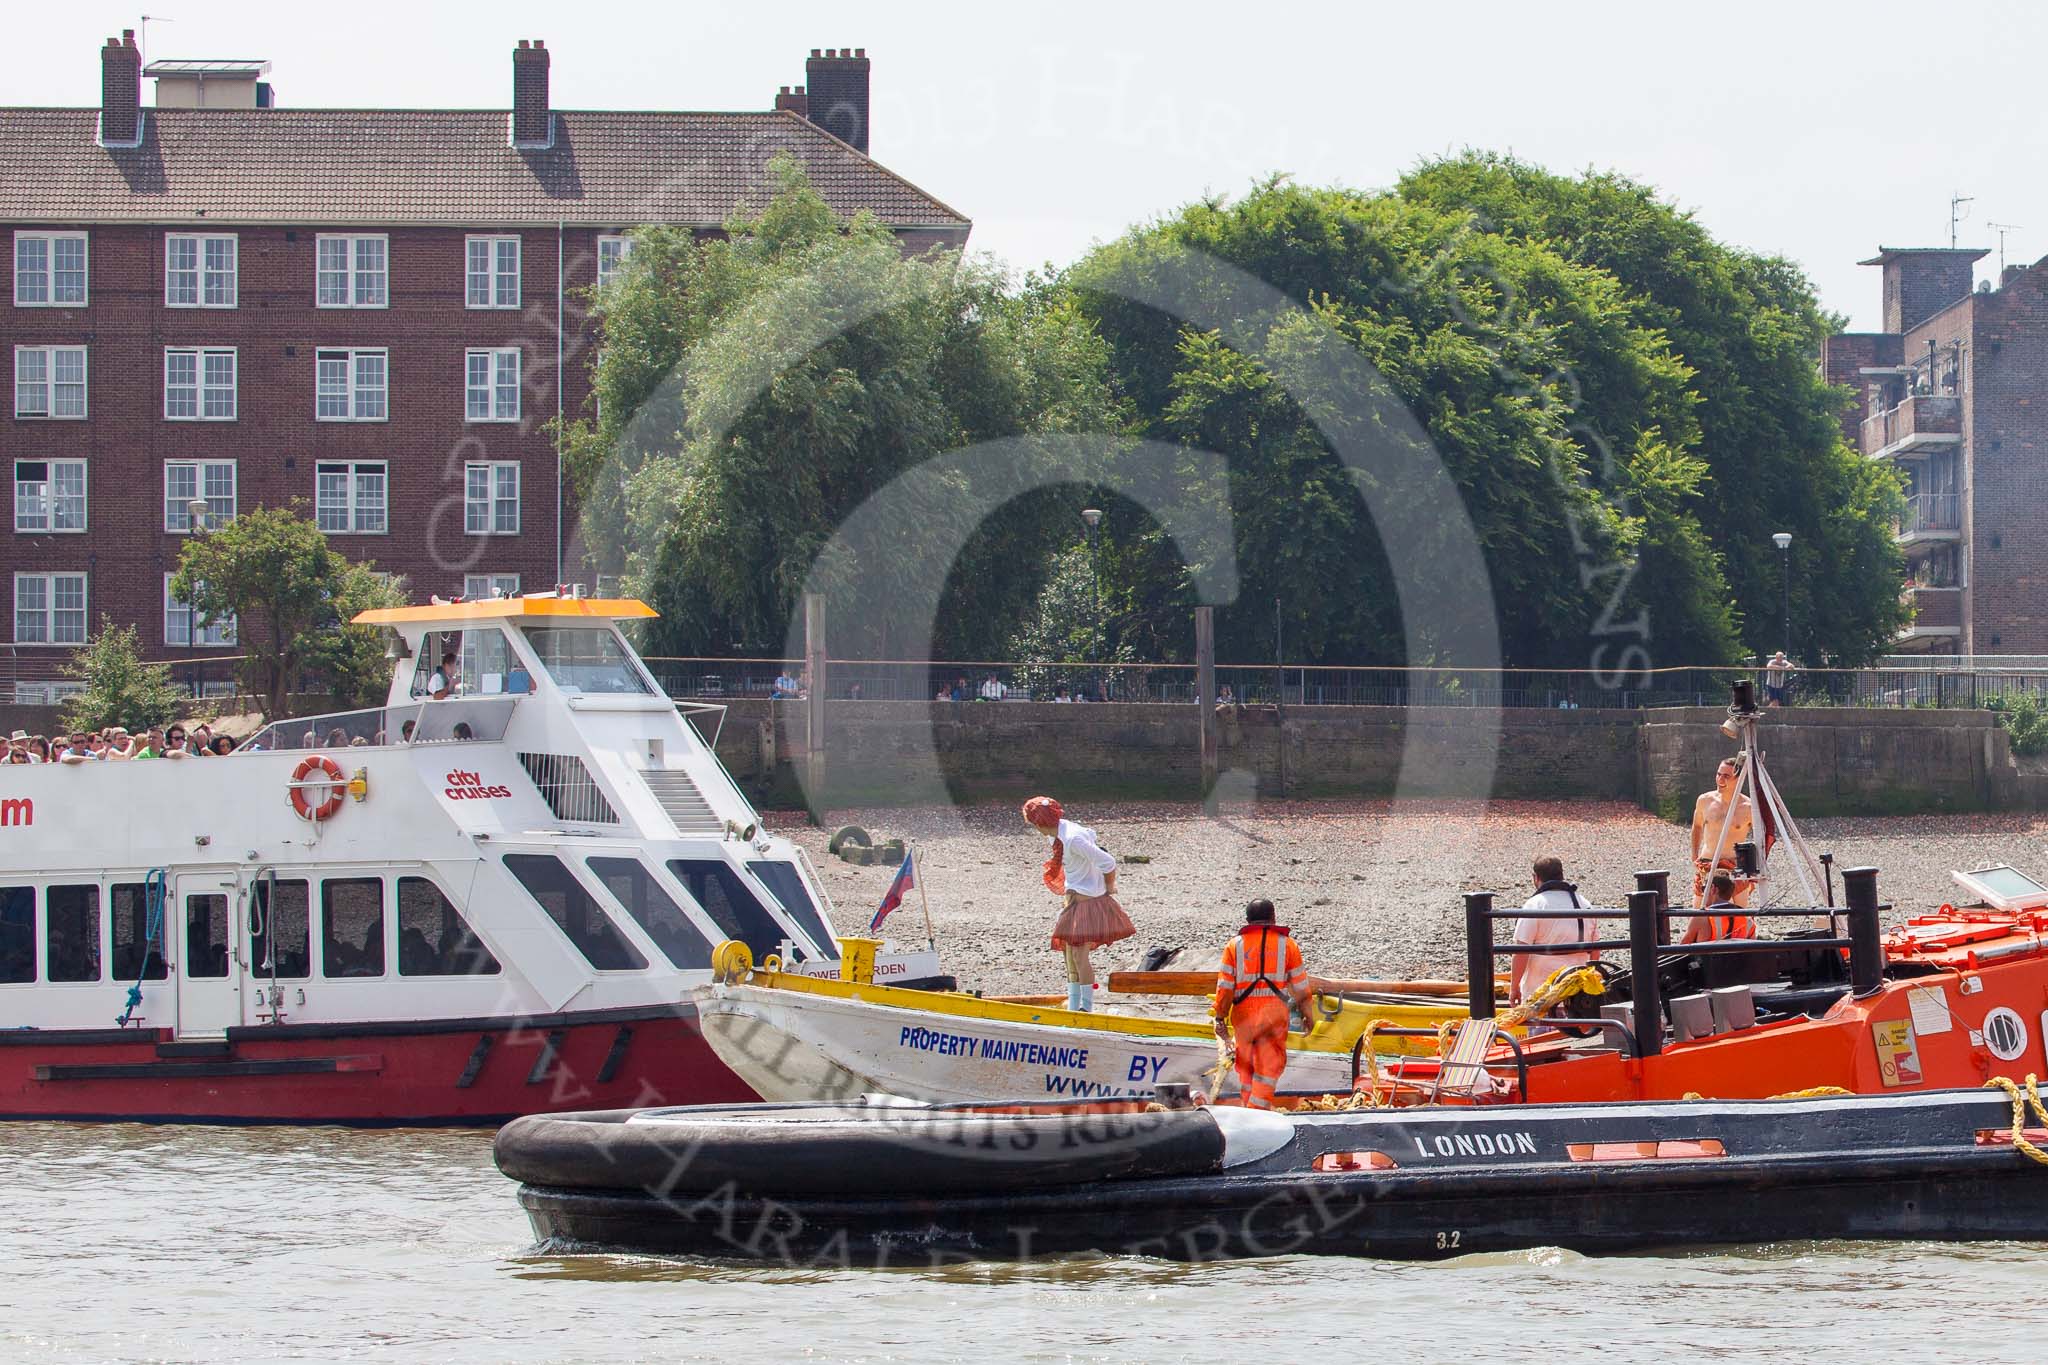 TOW River Thames Barge Driving Race 2013: Barge "Hoppy", by GPS Fabrication, behind GPS Marine tug "GPS Vincia", behind them plasure boat "Mayflower Garden" by City Cruises..
River Thames between Greenwich and Westminster,
London,

United Kingdom,
on 13 July 2013 at 12:24, image #81